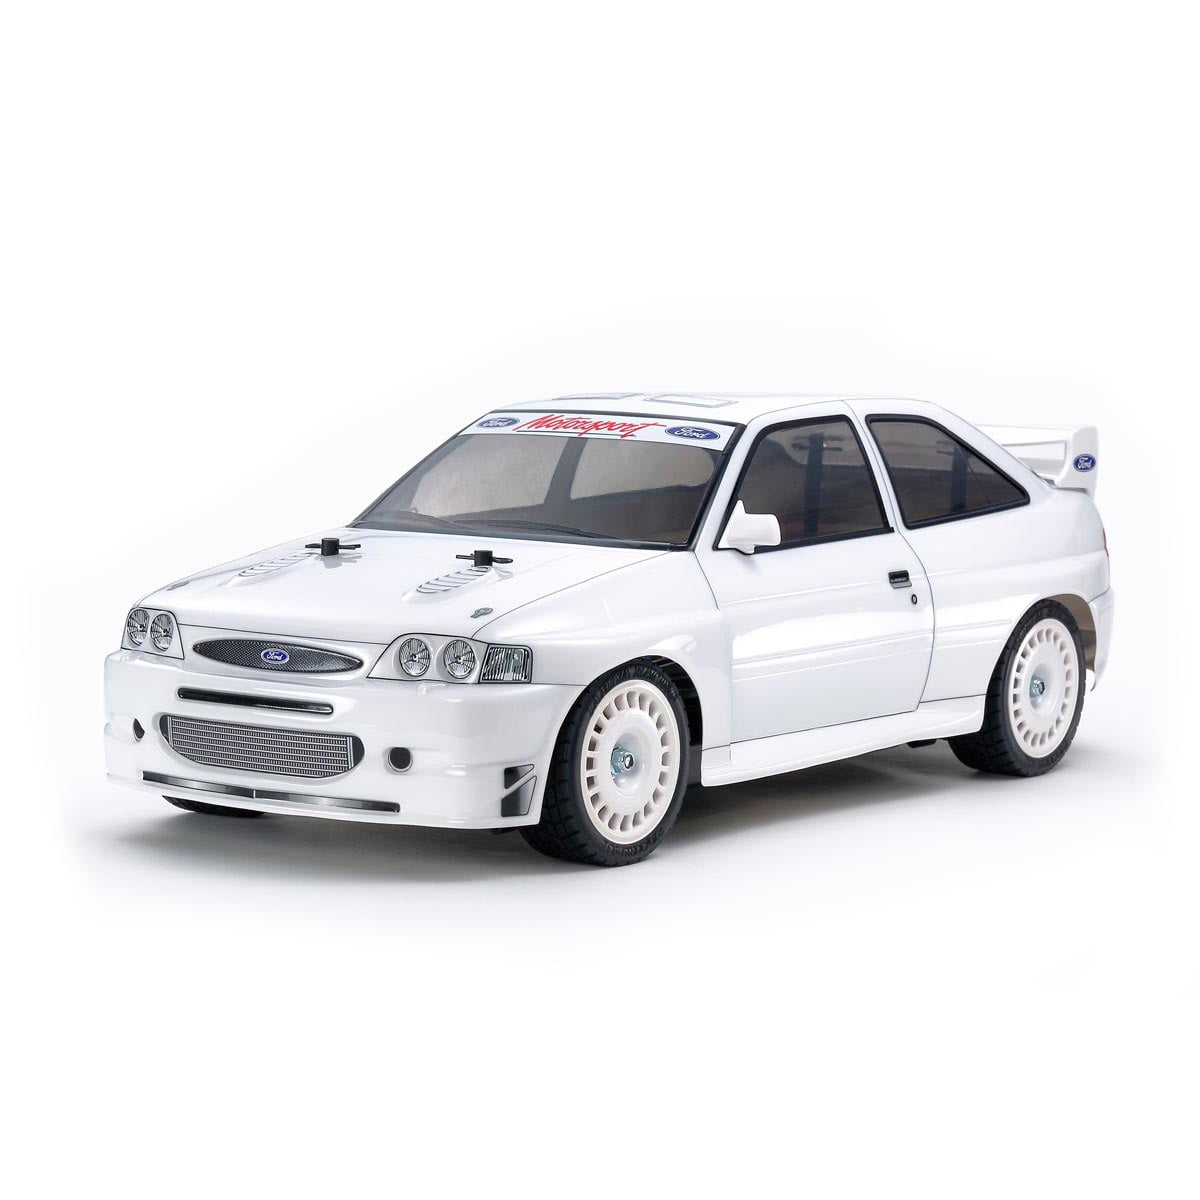 XL Large Car Ford Escort Cosworth Bedroom Graphic Wall Art Decal Sticker 